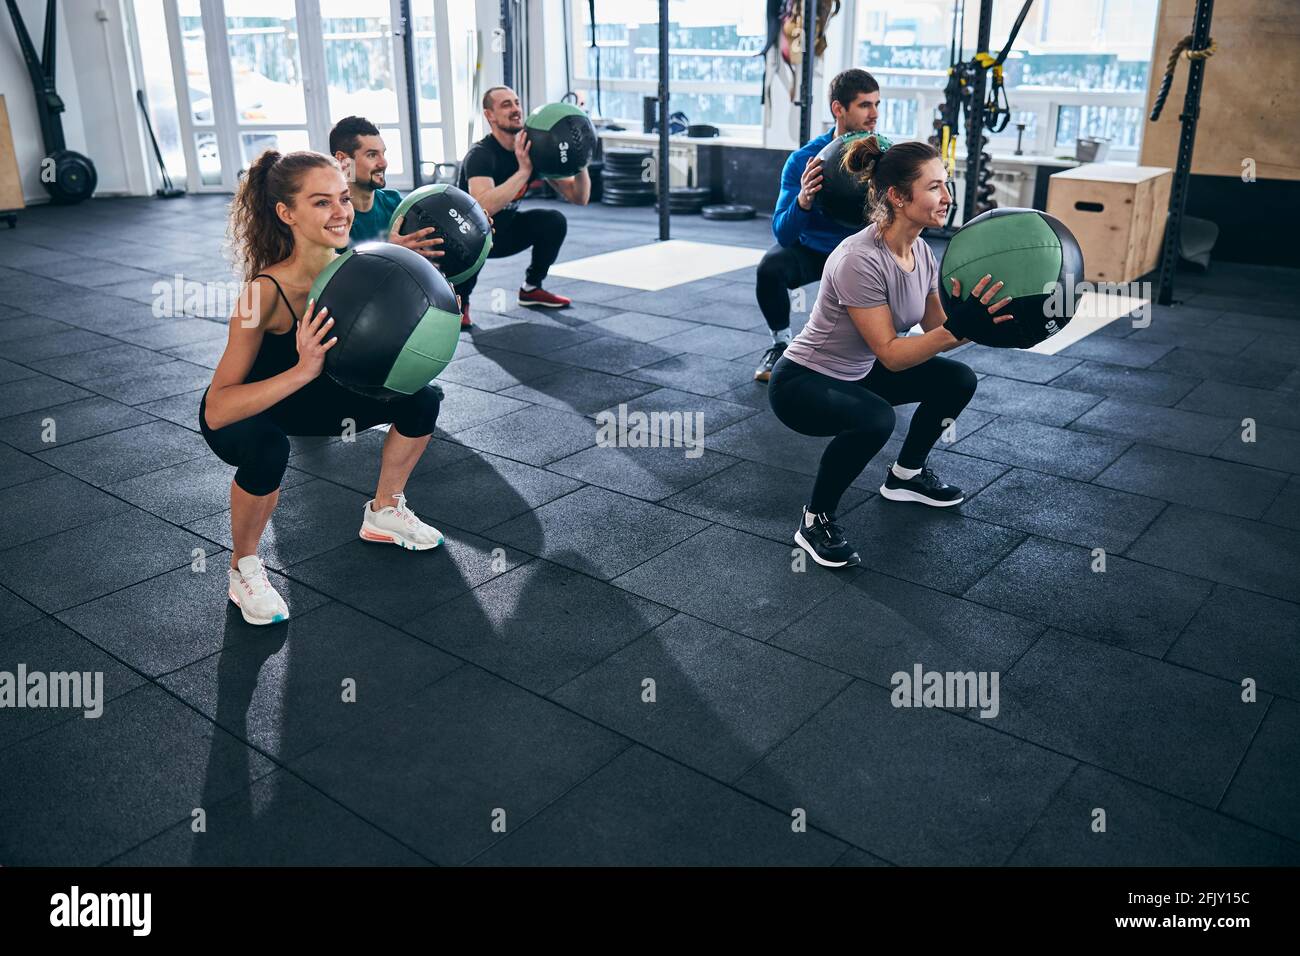 Five athletes exercising with stability balls indoors Stock Photo